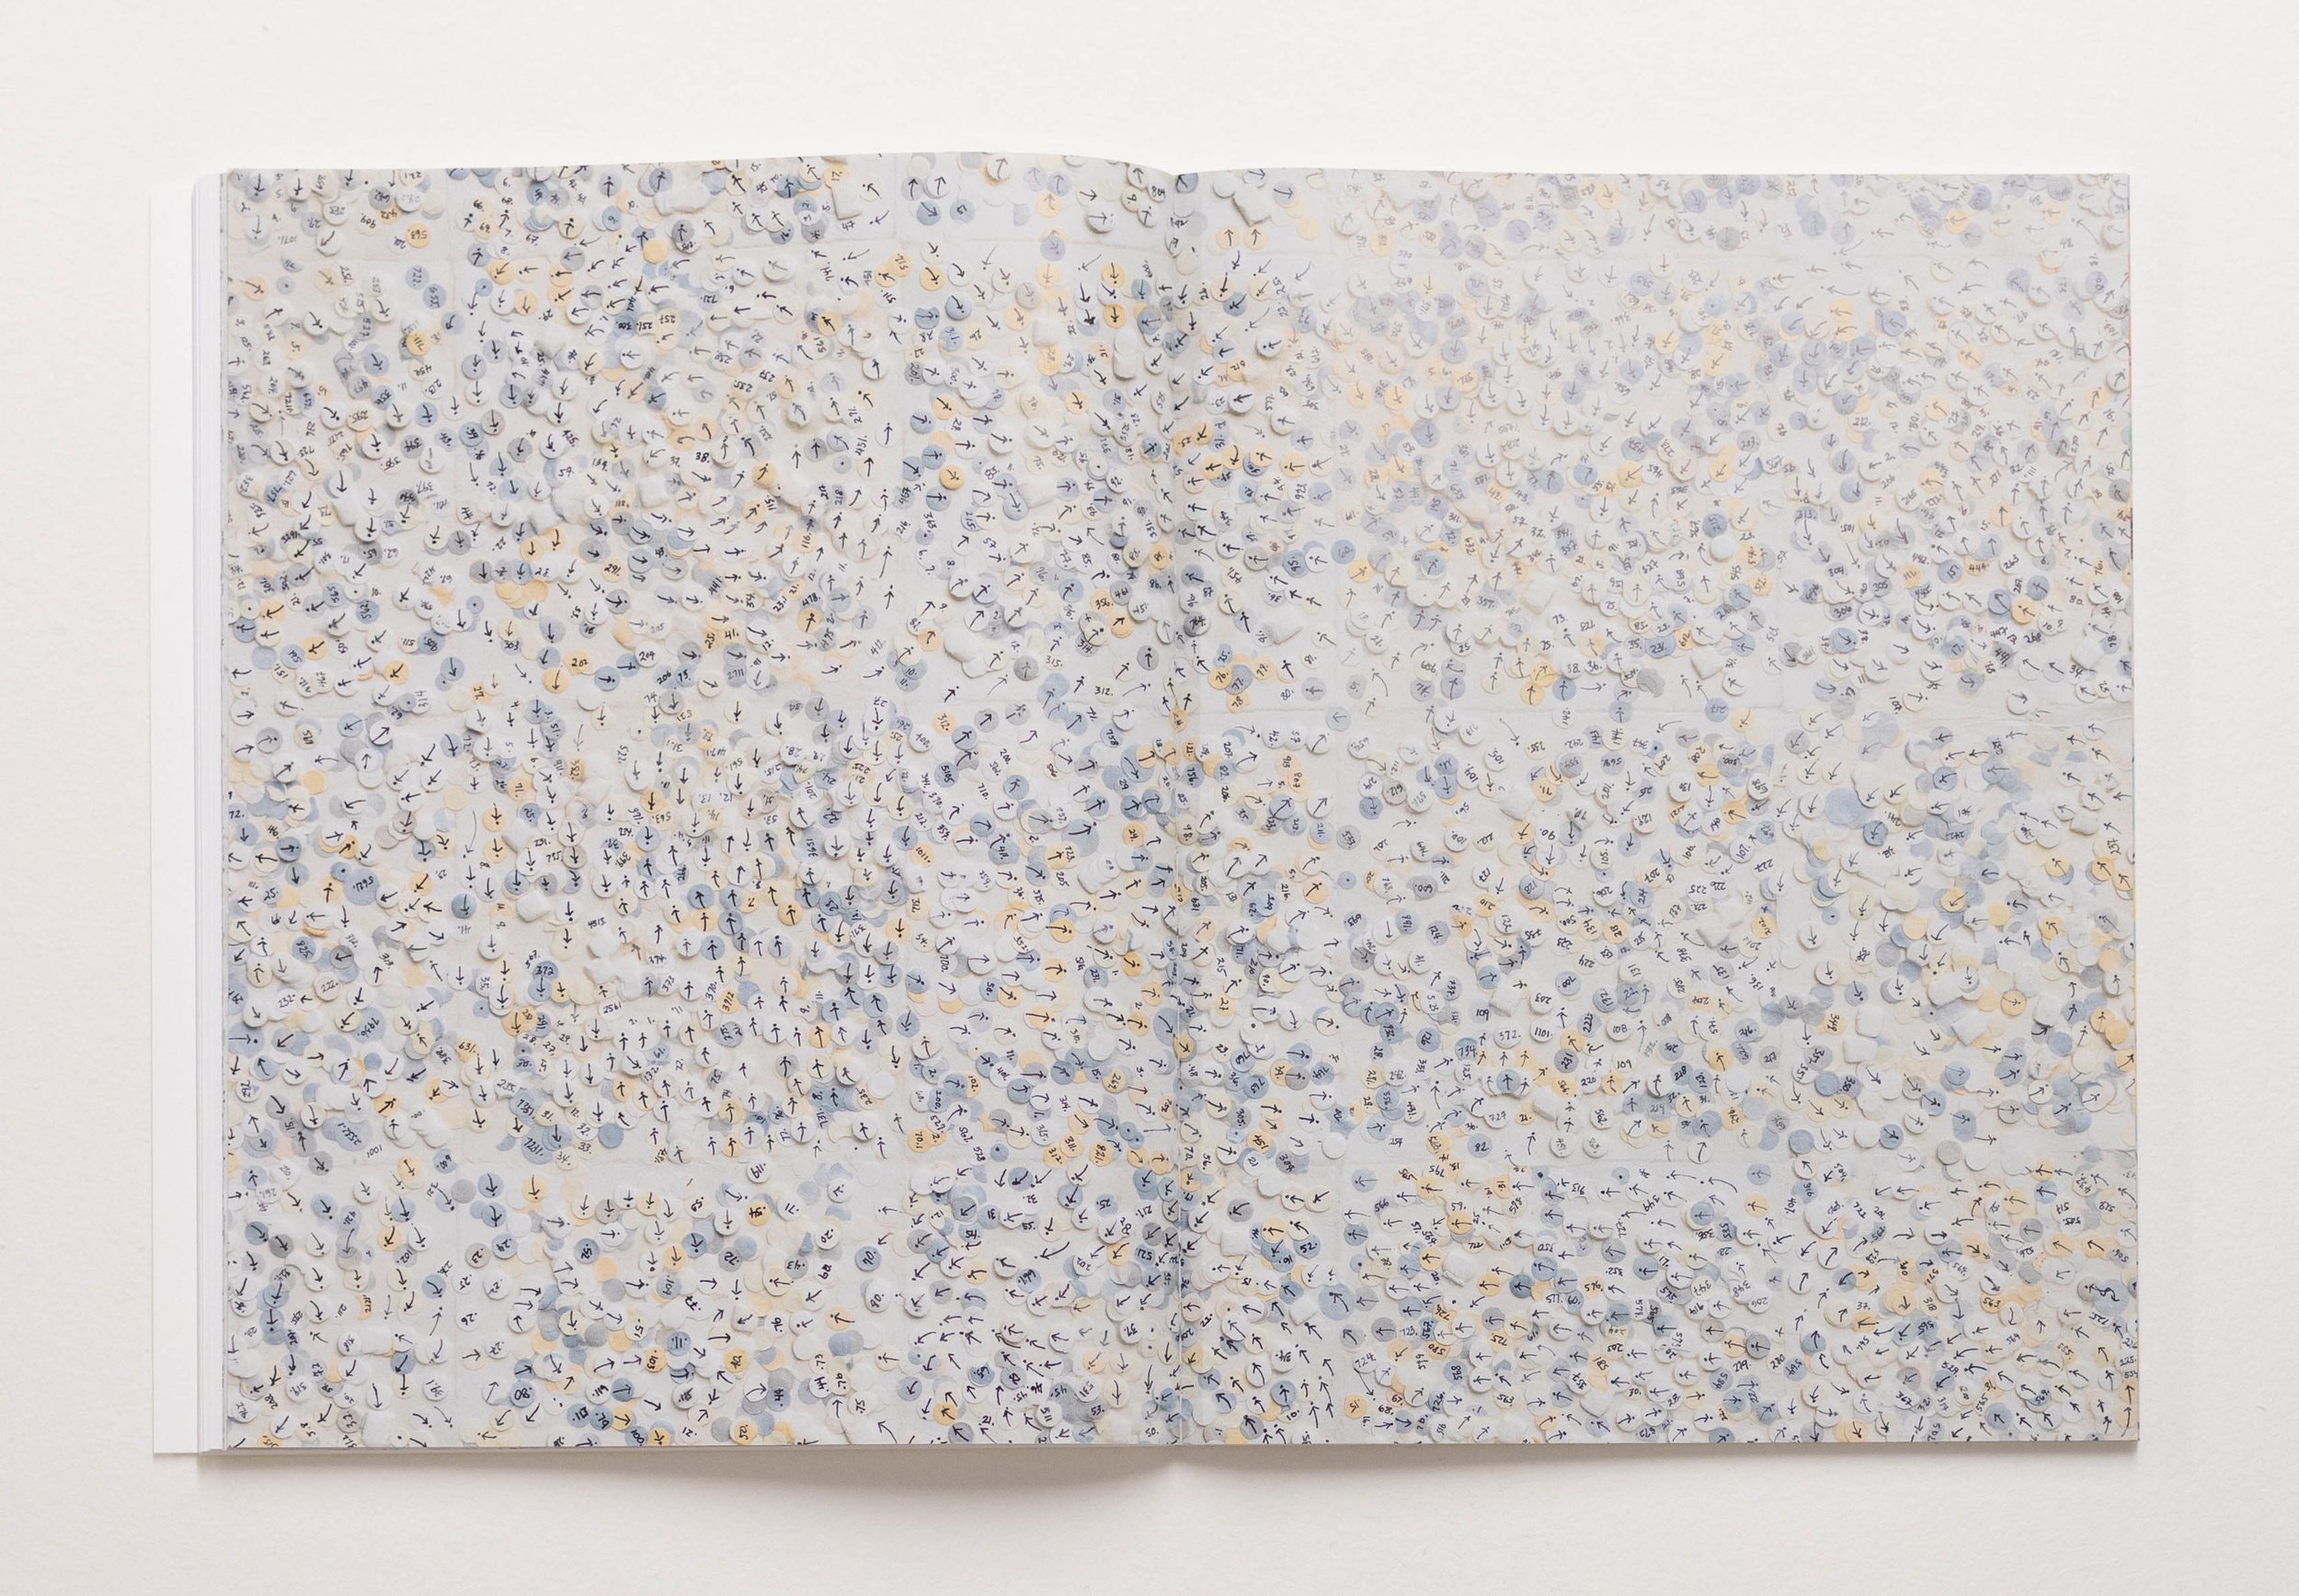 Book Release: Howardena Pindell - Numbers / Pathways / Grids